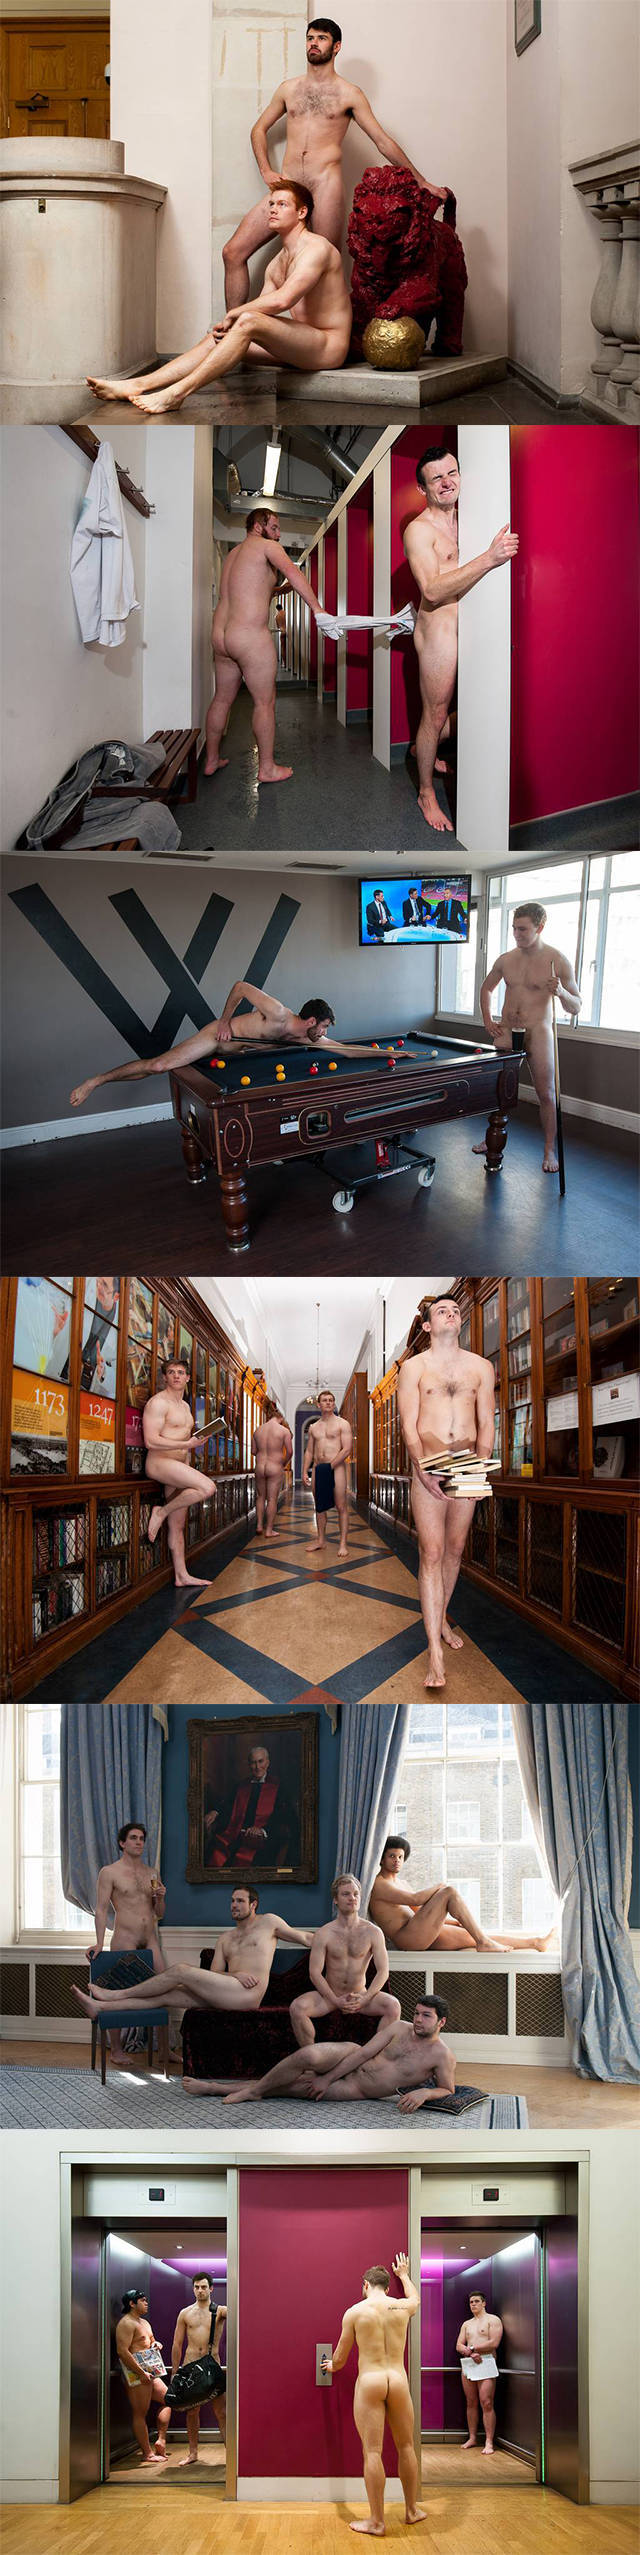 rugger bugger naked english rugby players calendar